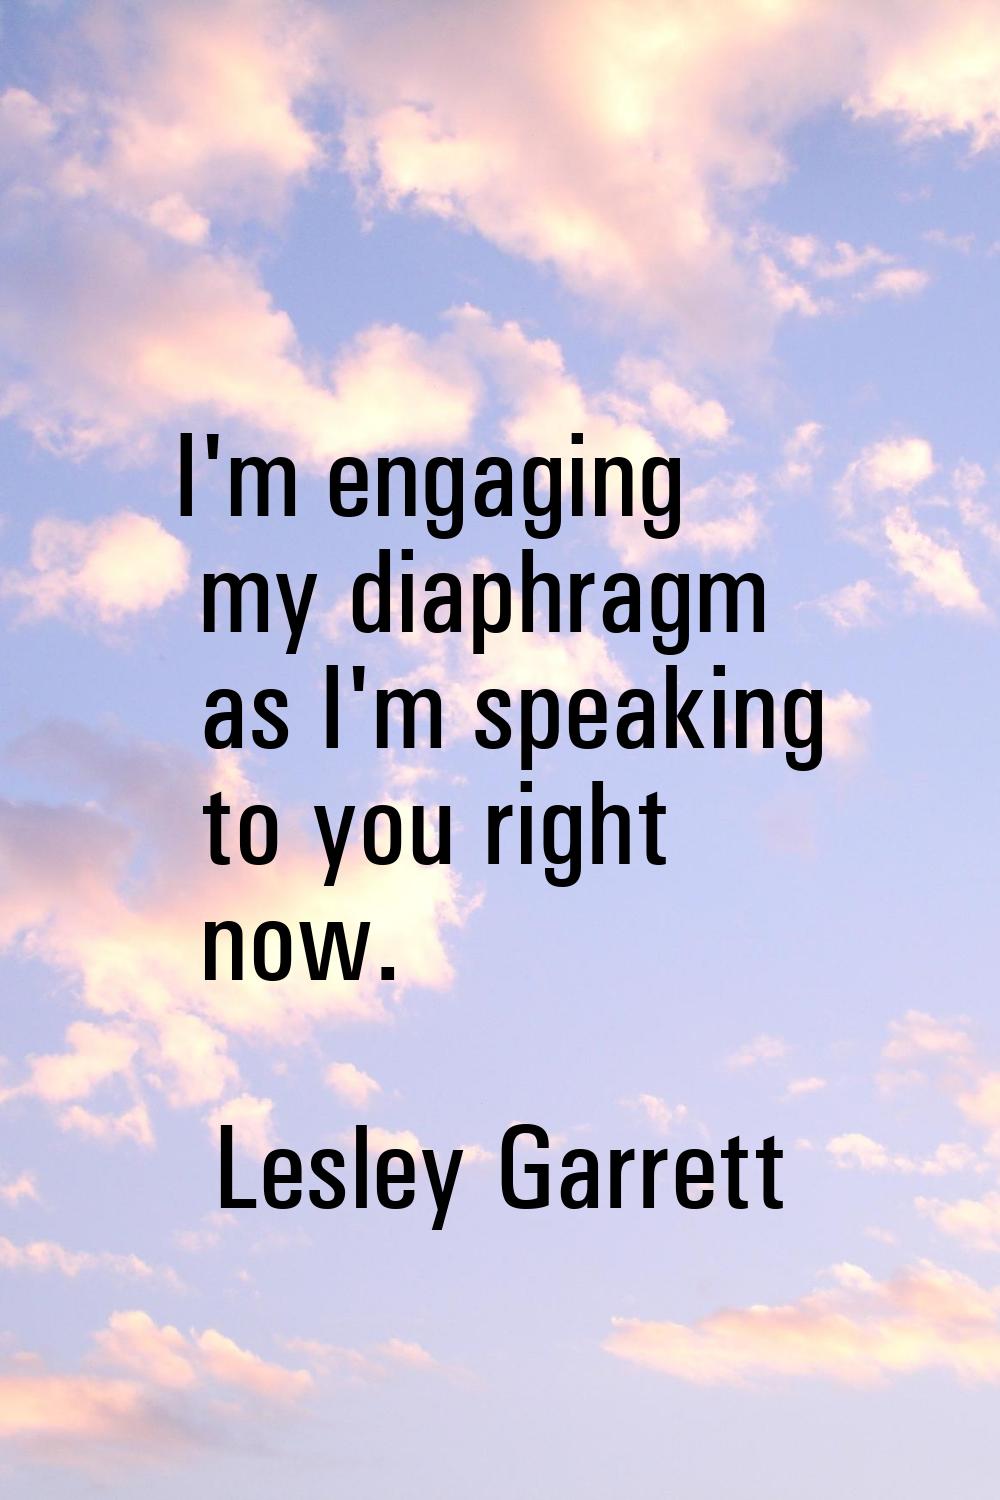 I'm engaging my diaphragm as I'm speaking to you right now.